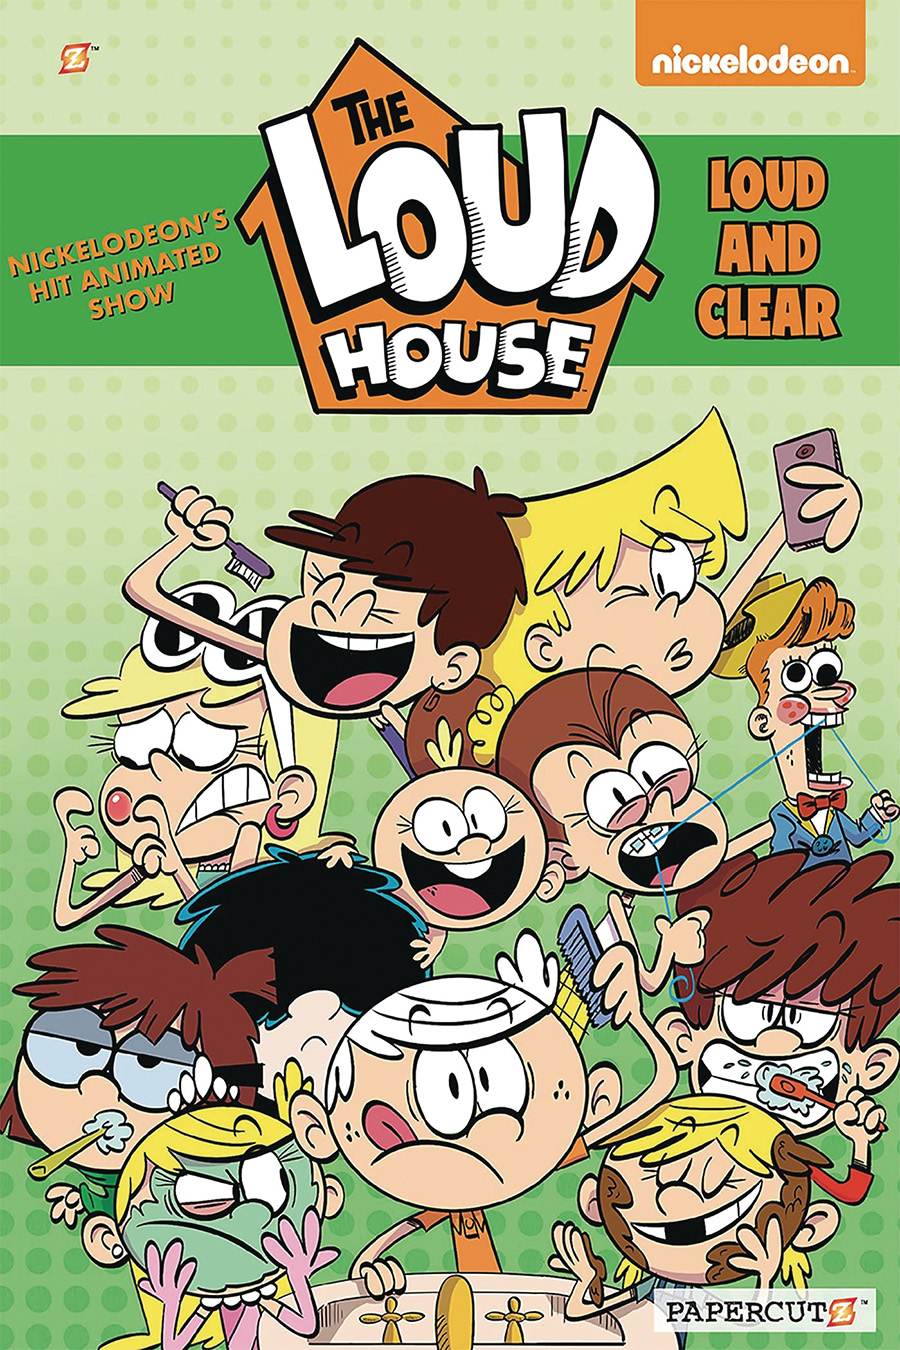 Loud House Vol 16 Loud And Clear TP